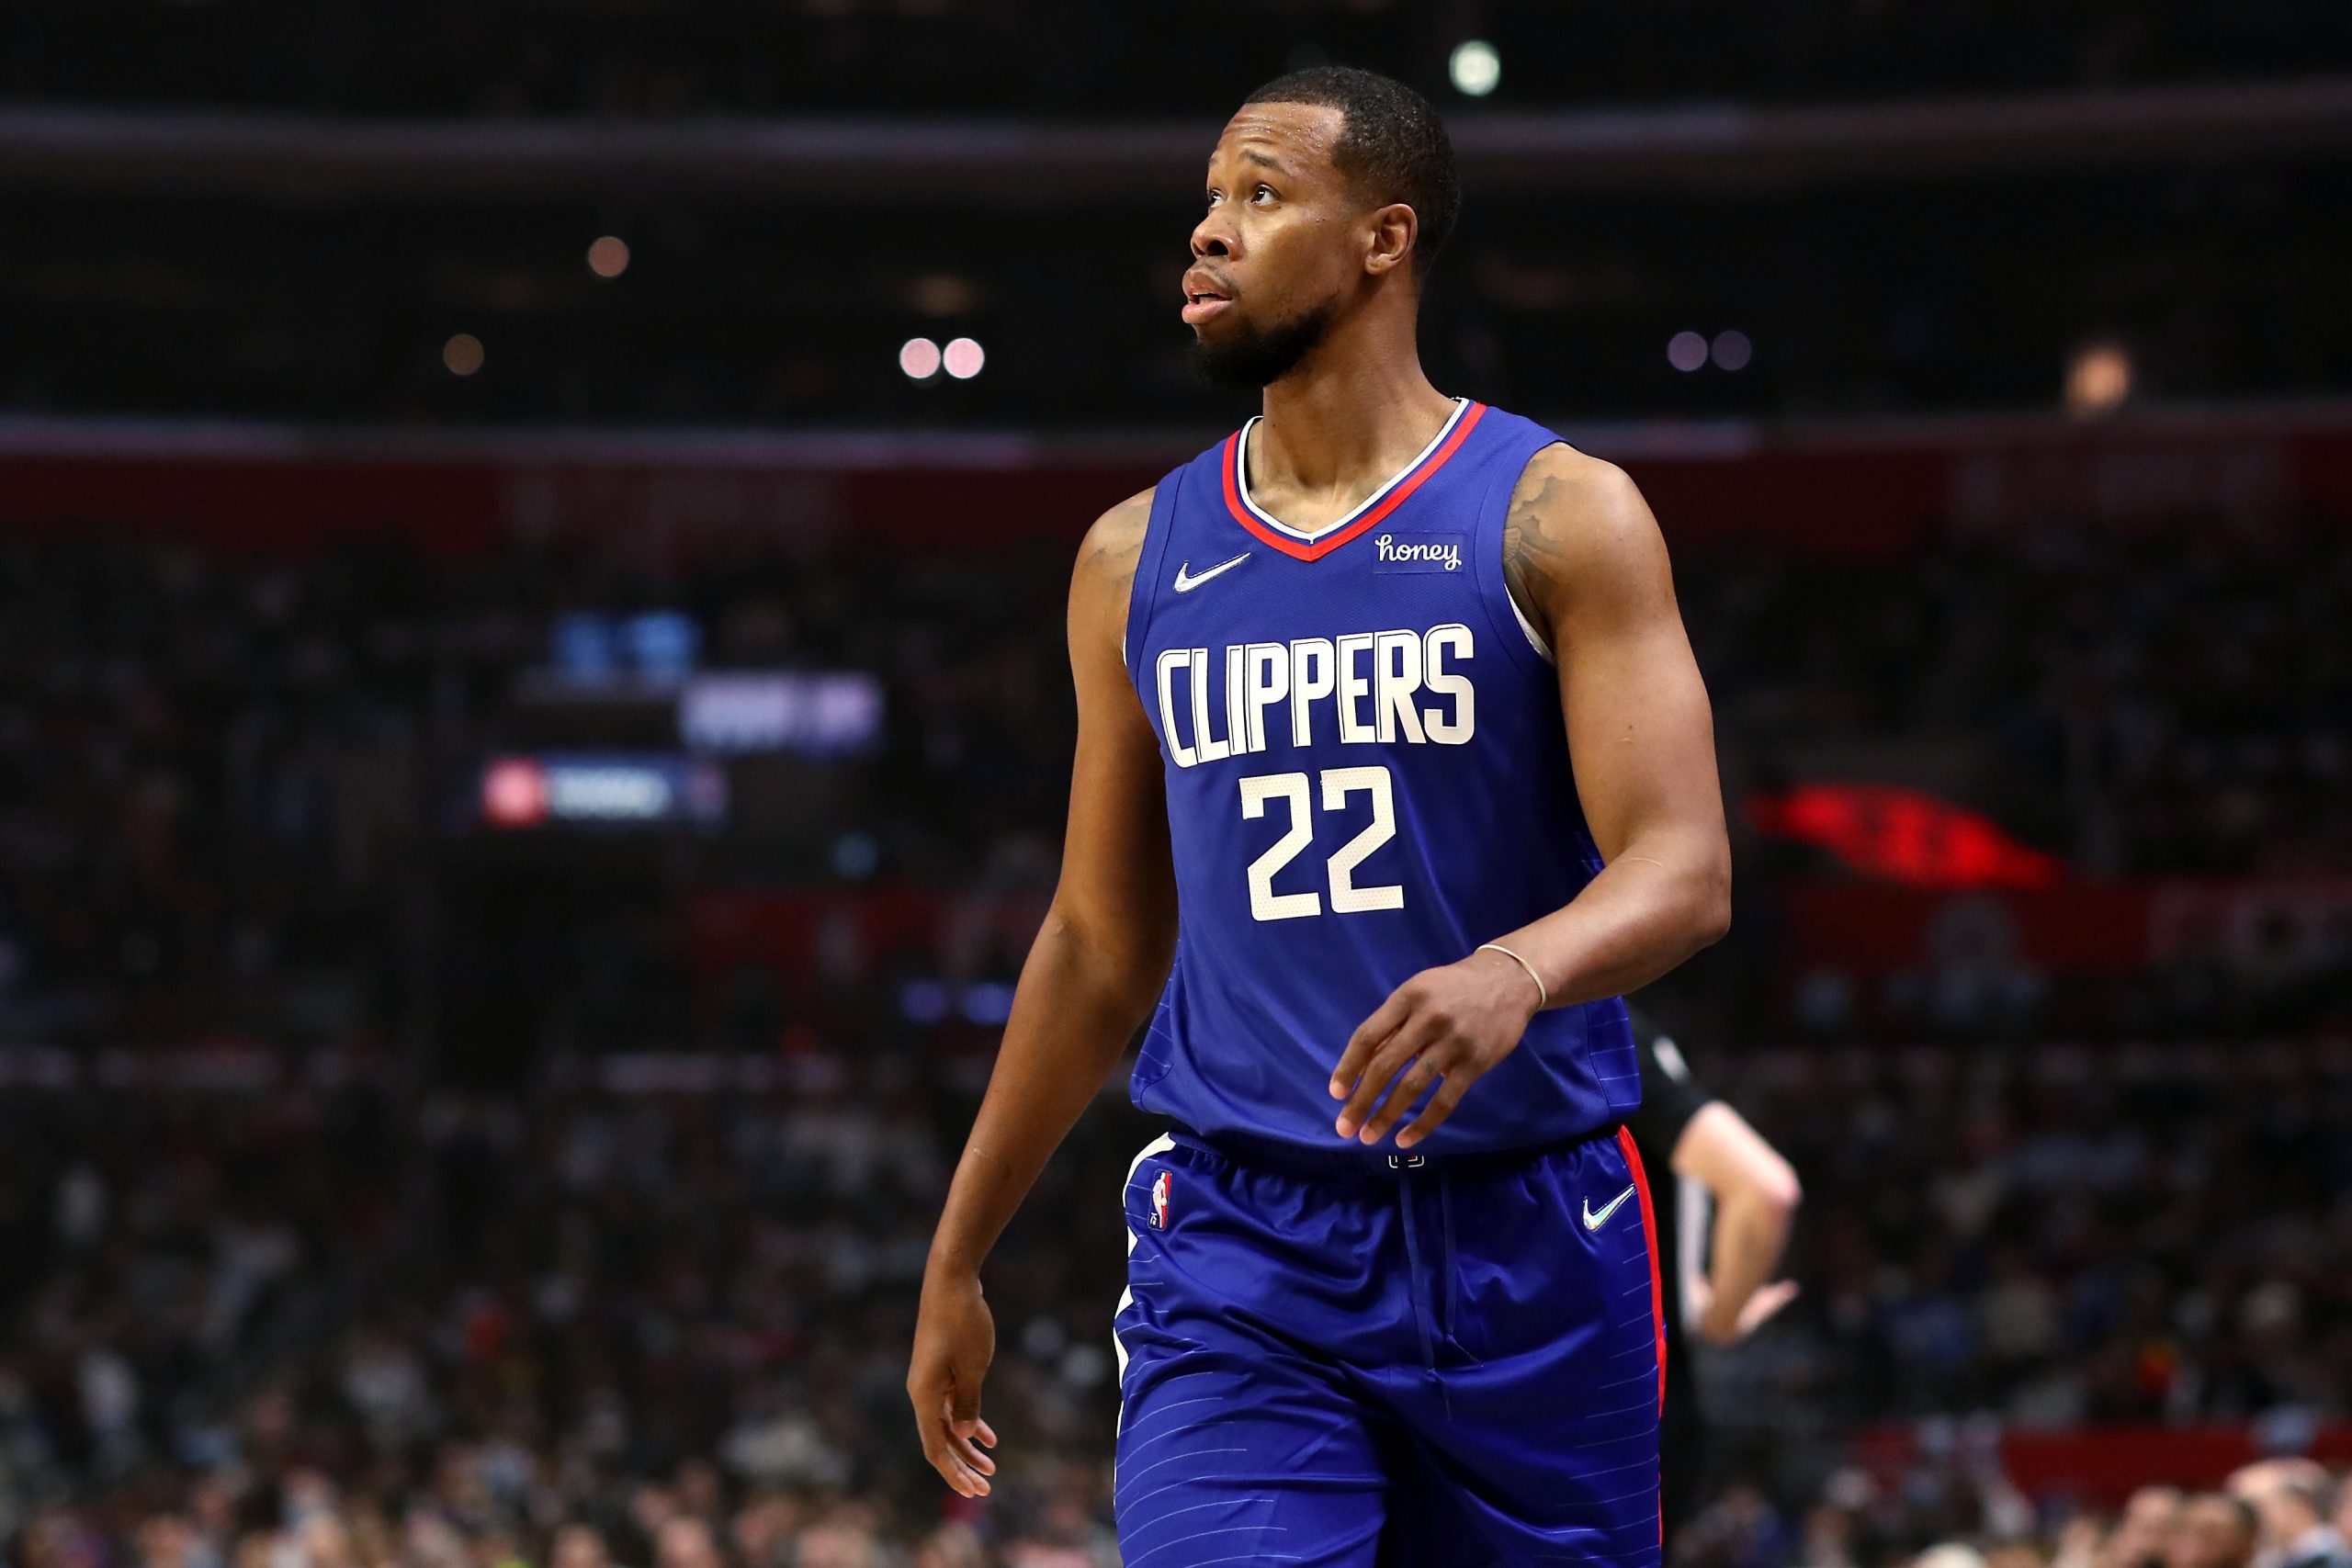 Rodney Hood Coaches The Next Generation At The NBPA Top 100 Camp | SLAM